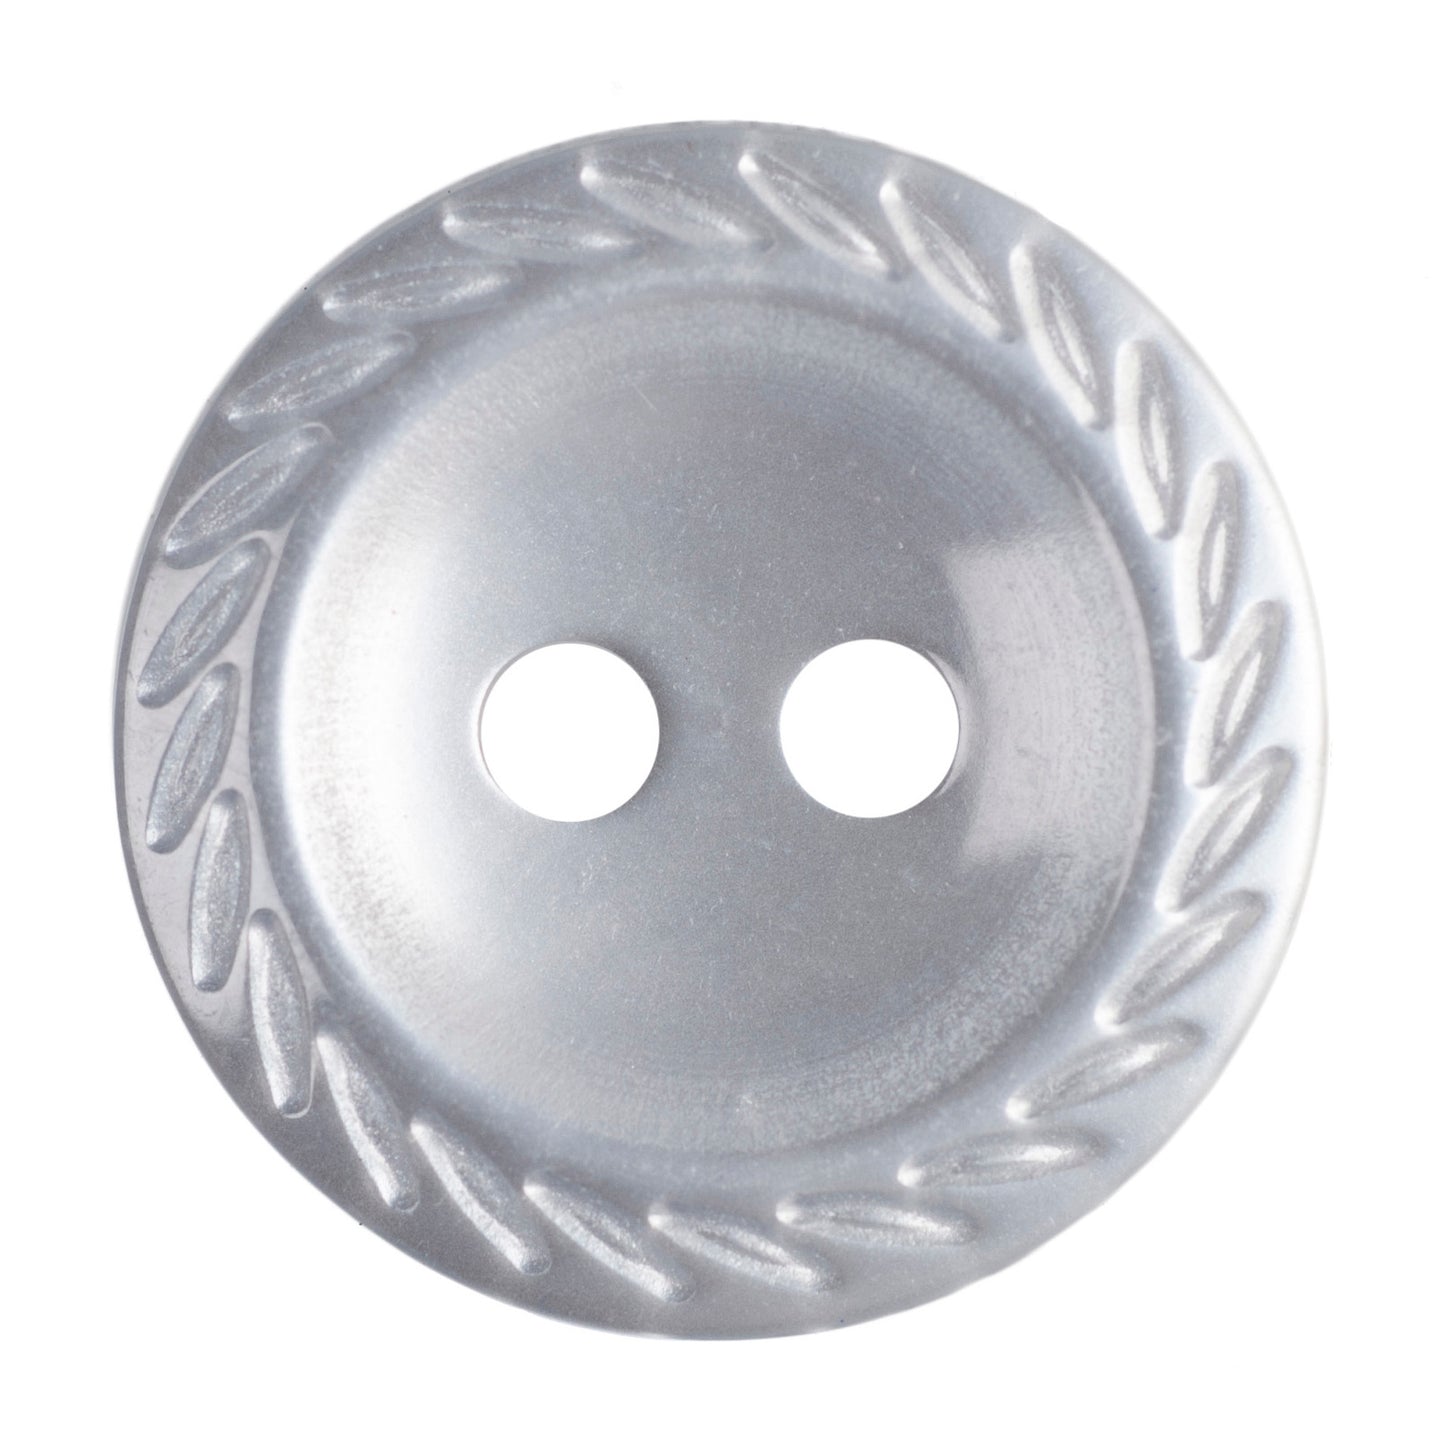 Polyester Rope Edge Button - 14mm - Pearl White [LB16.1]